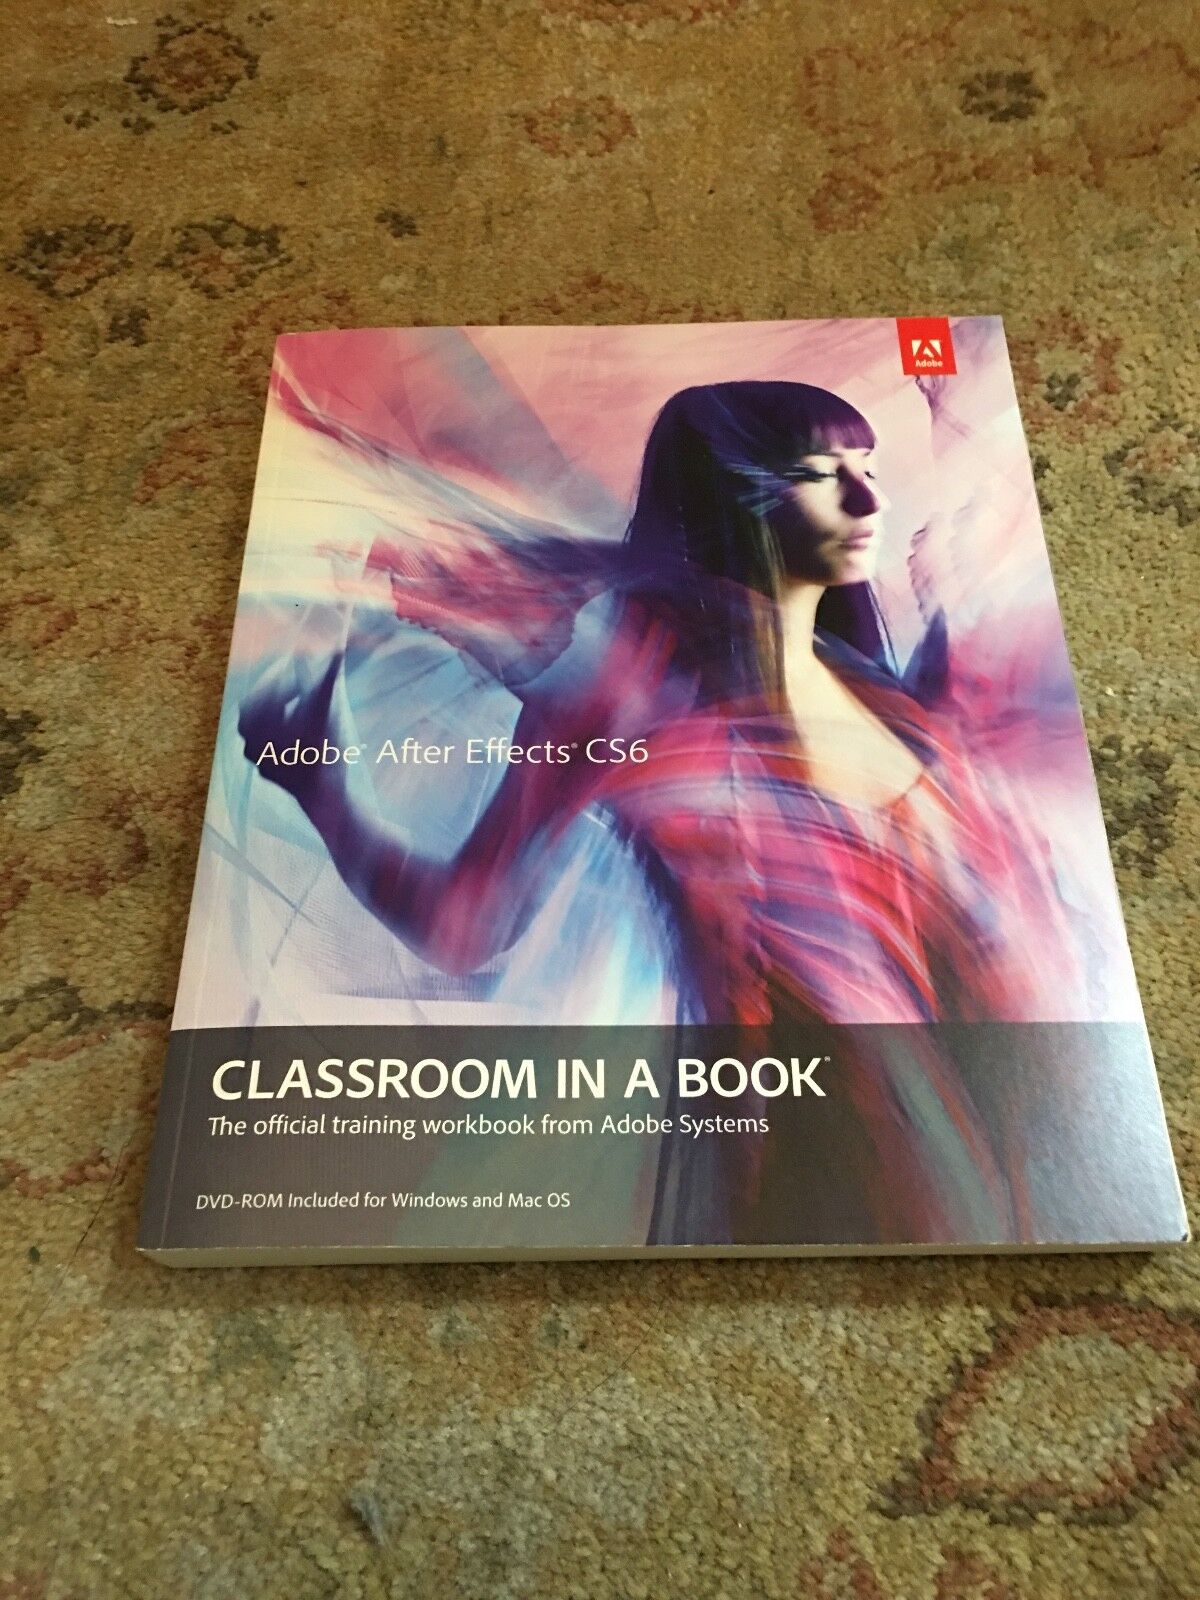 Classroom in a Book: Adobe after Effects CS6 Classroom in a Book by  Adobe... 9780321822437 | eBay